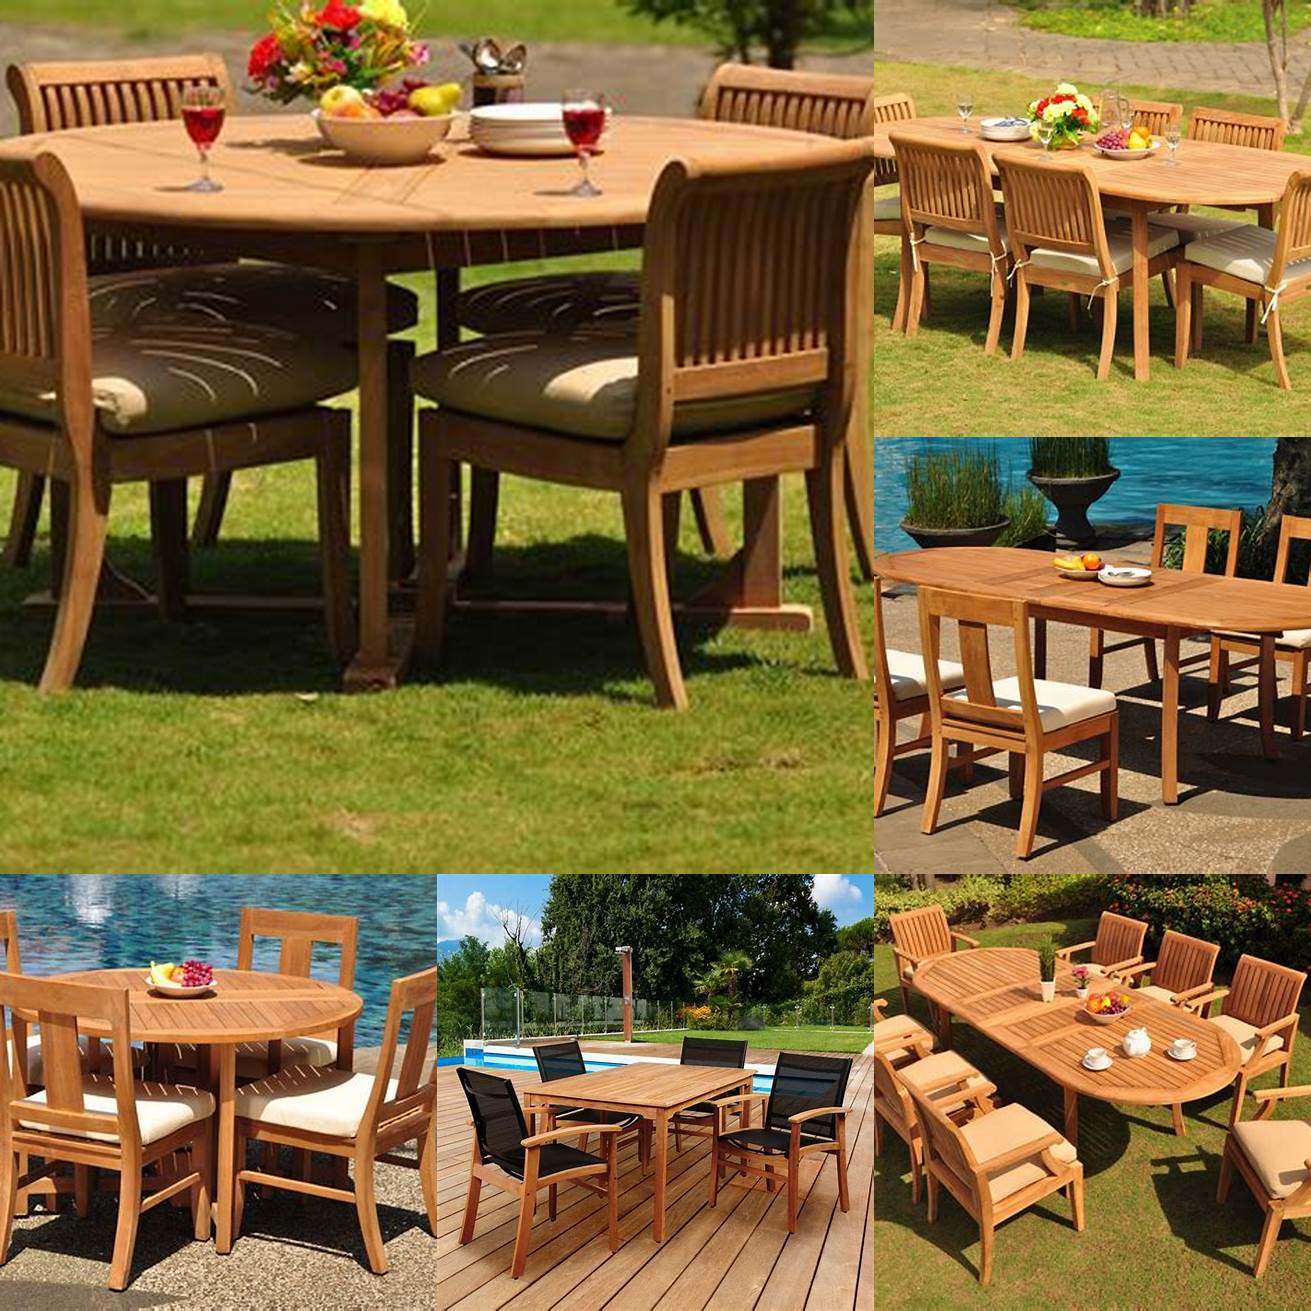 Outdoor dining set with teak table and chairs